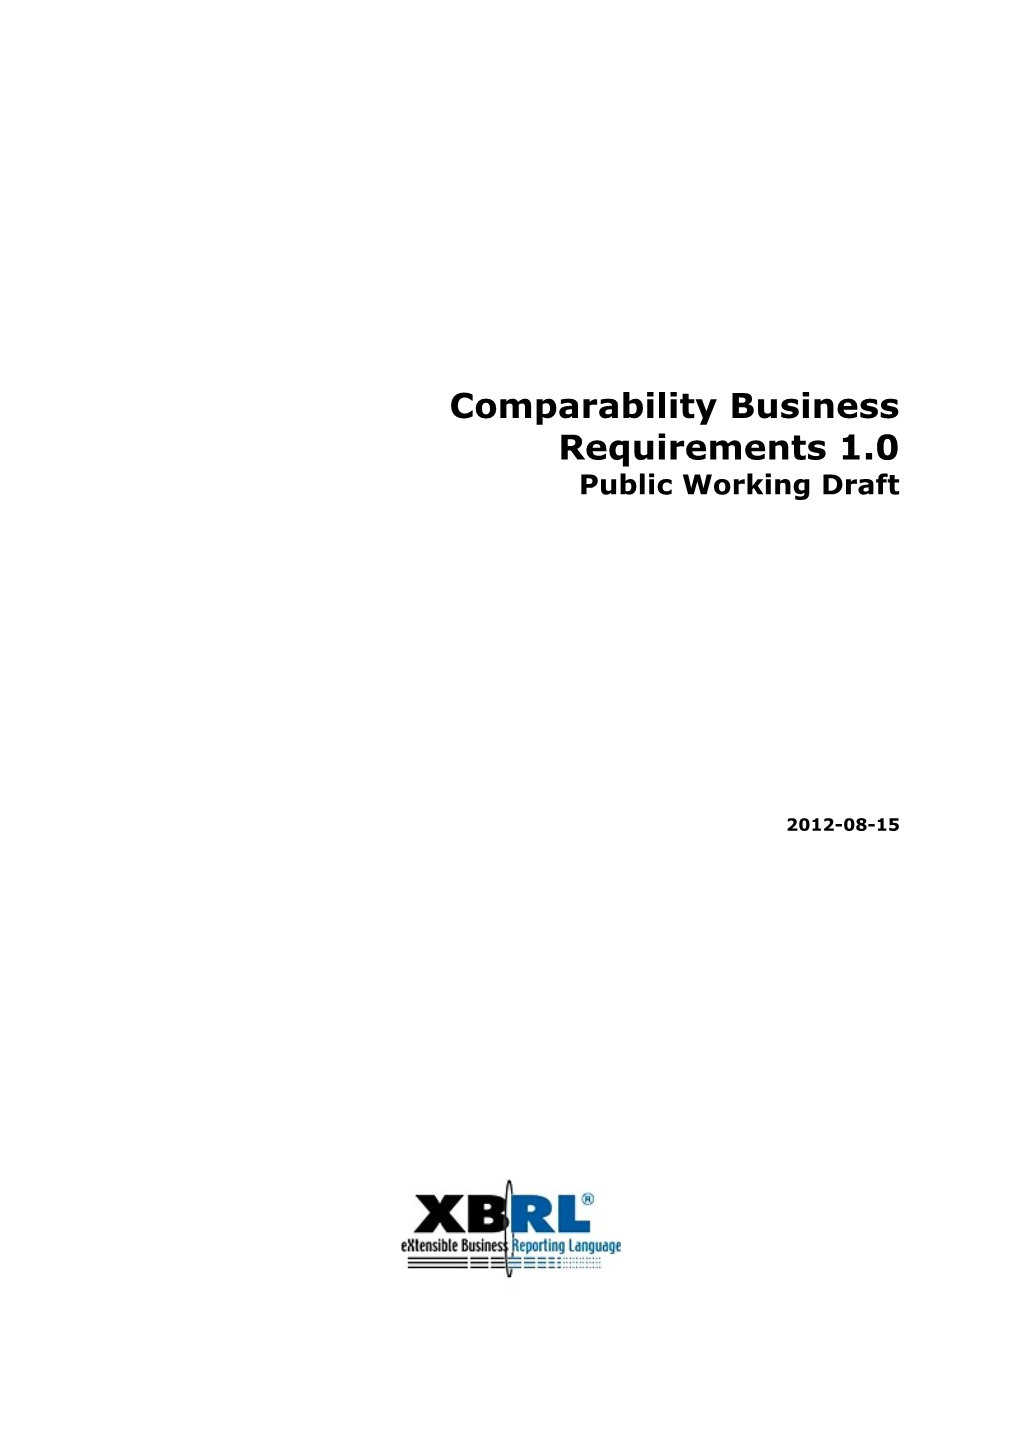 Comparability Business Requirements 1.0 Public Working Draft